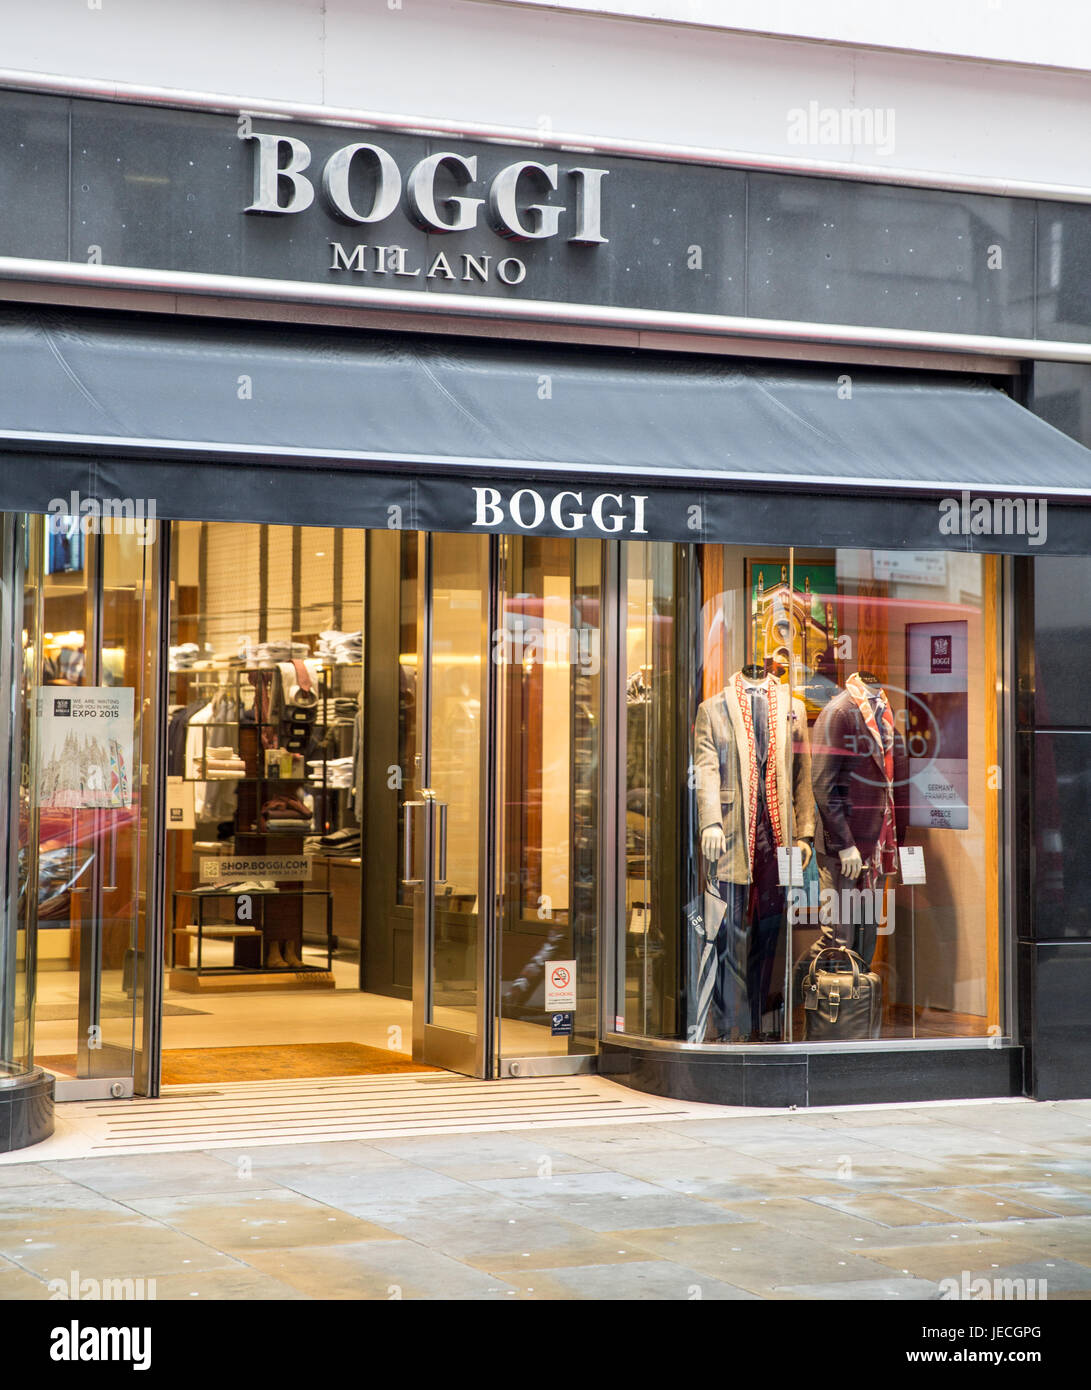 Boggi milano hi-res stock photography and images - Alamy